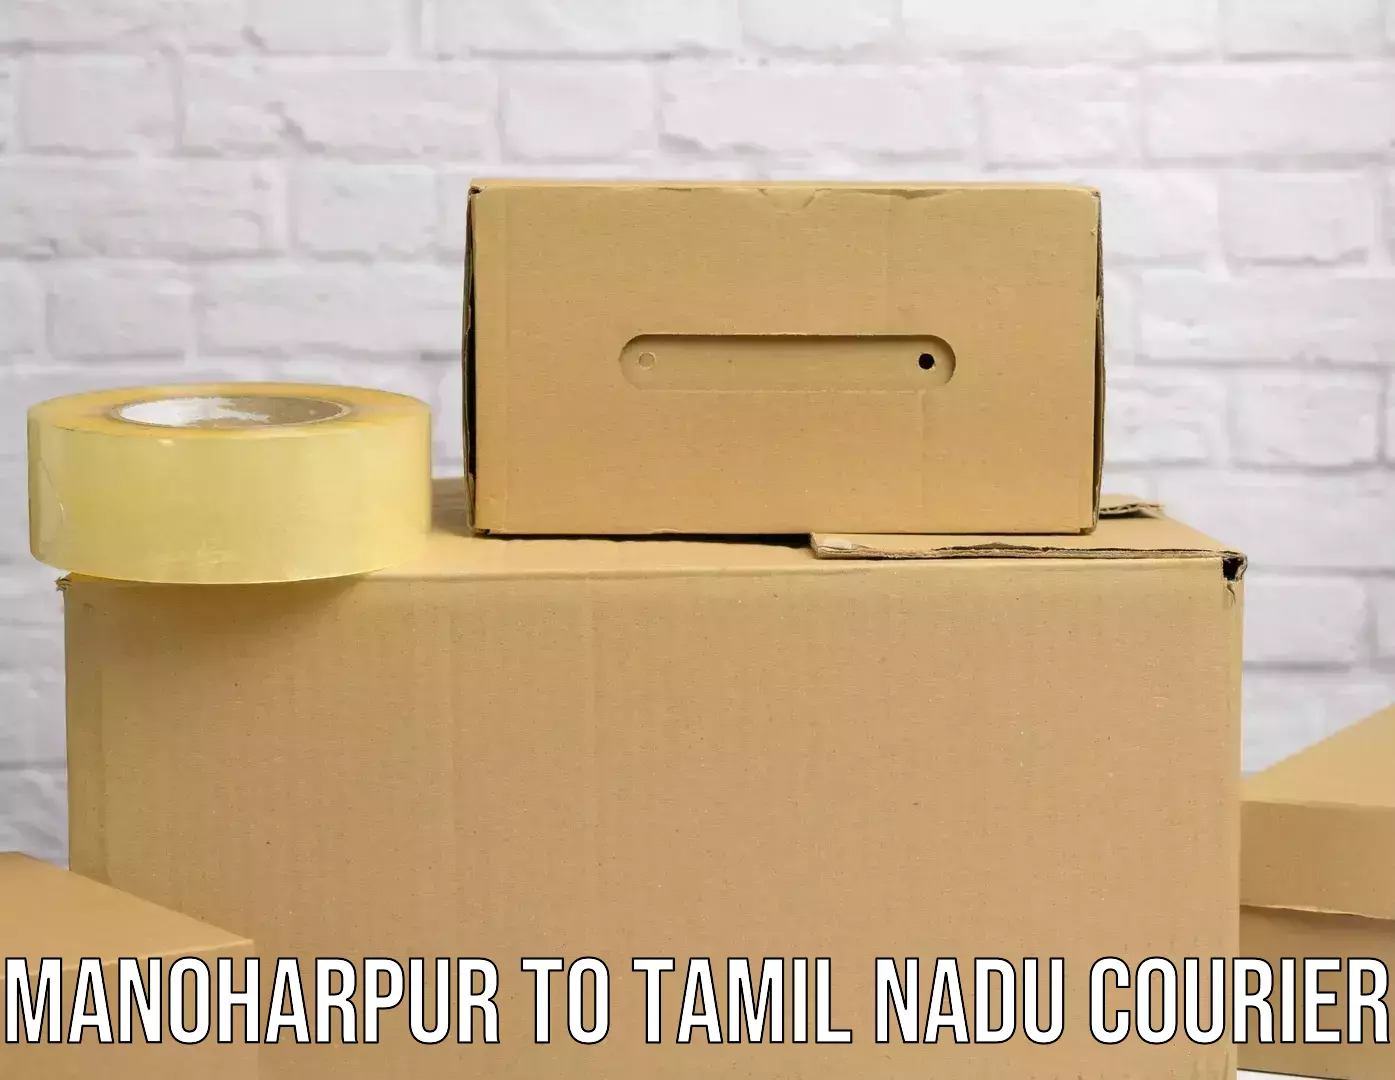 Ocean freight courier Manoharpur to Dindigul